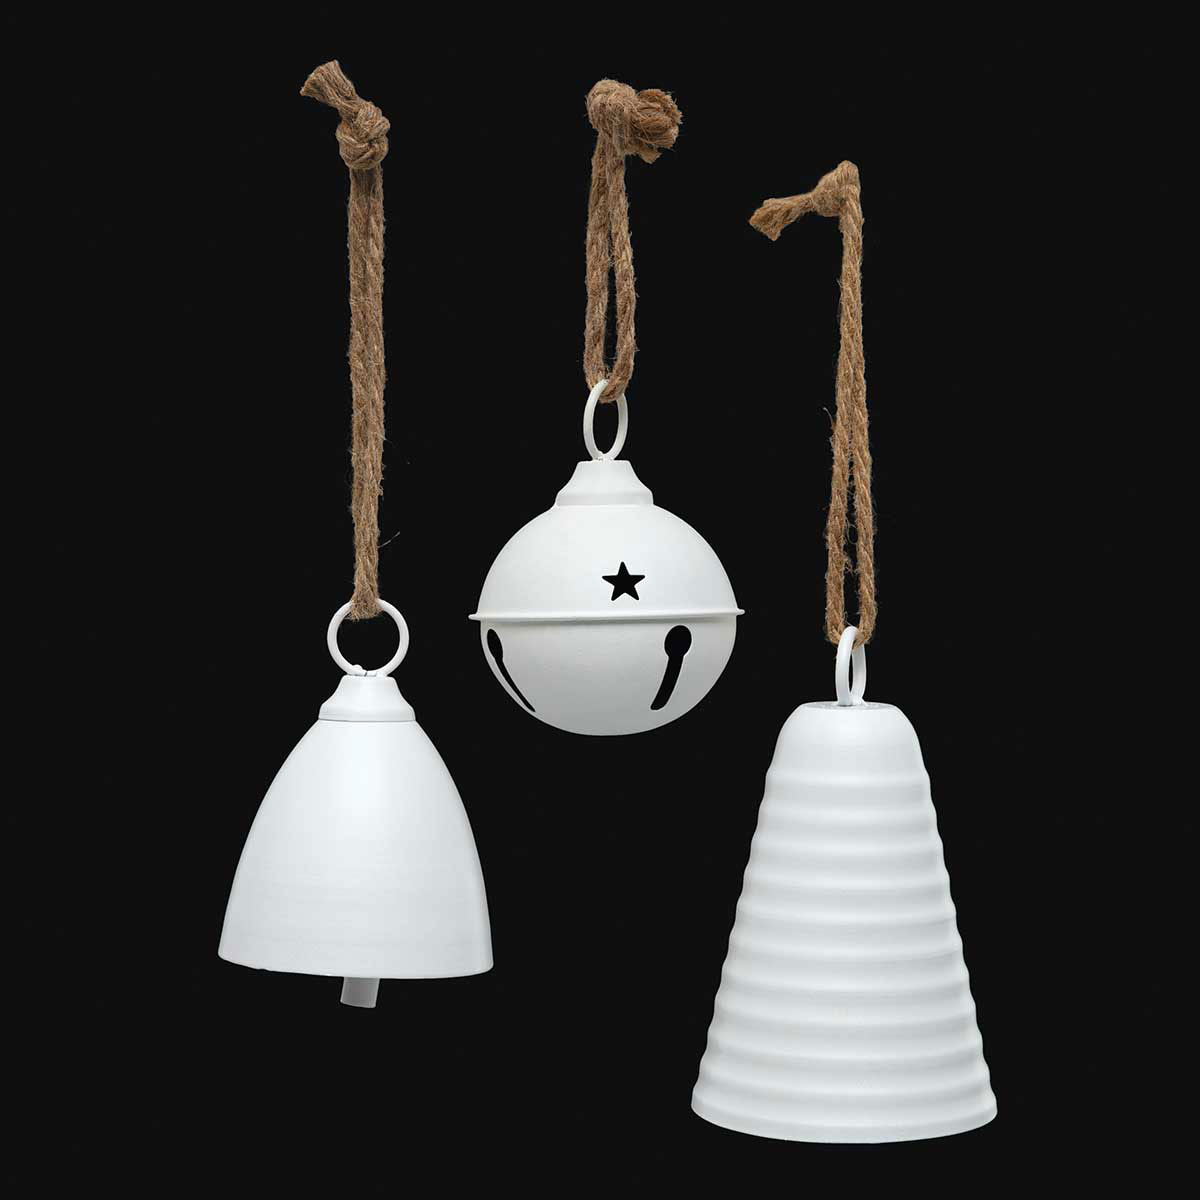 BELL DOME MATTE WHITE 4IN X 5.25IN METAL WITH ROPE HANGER